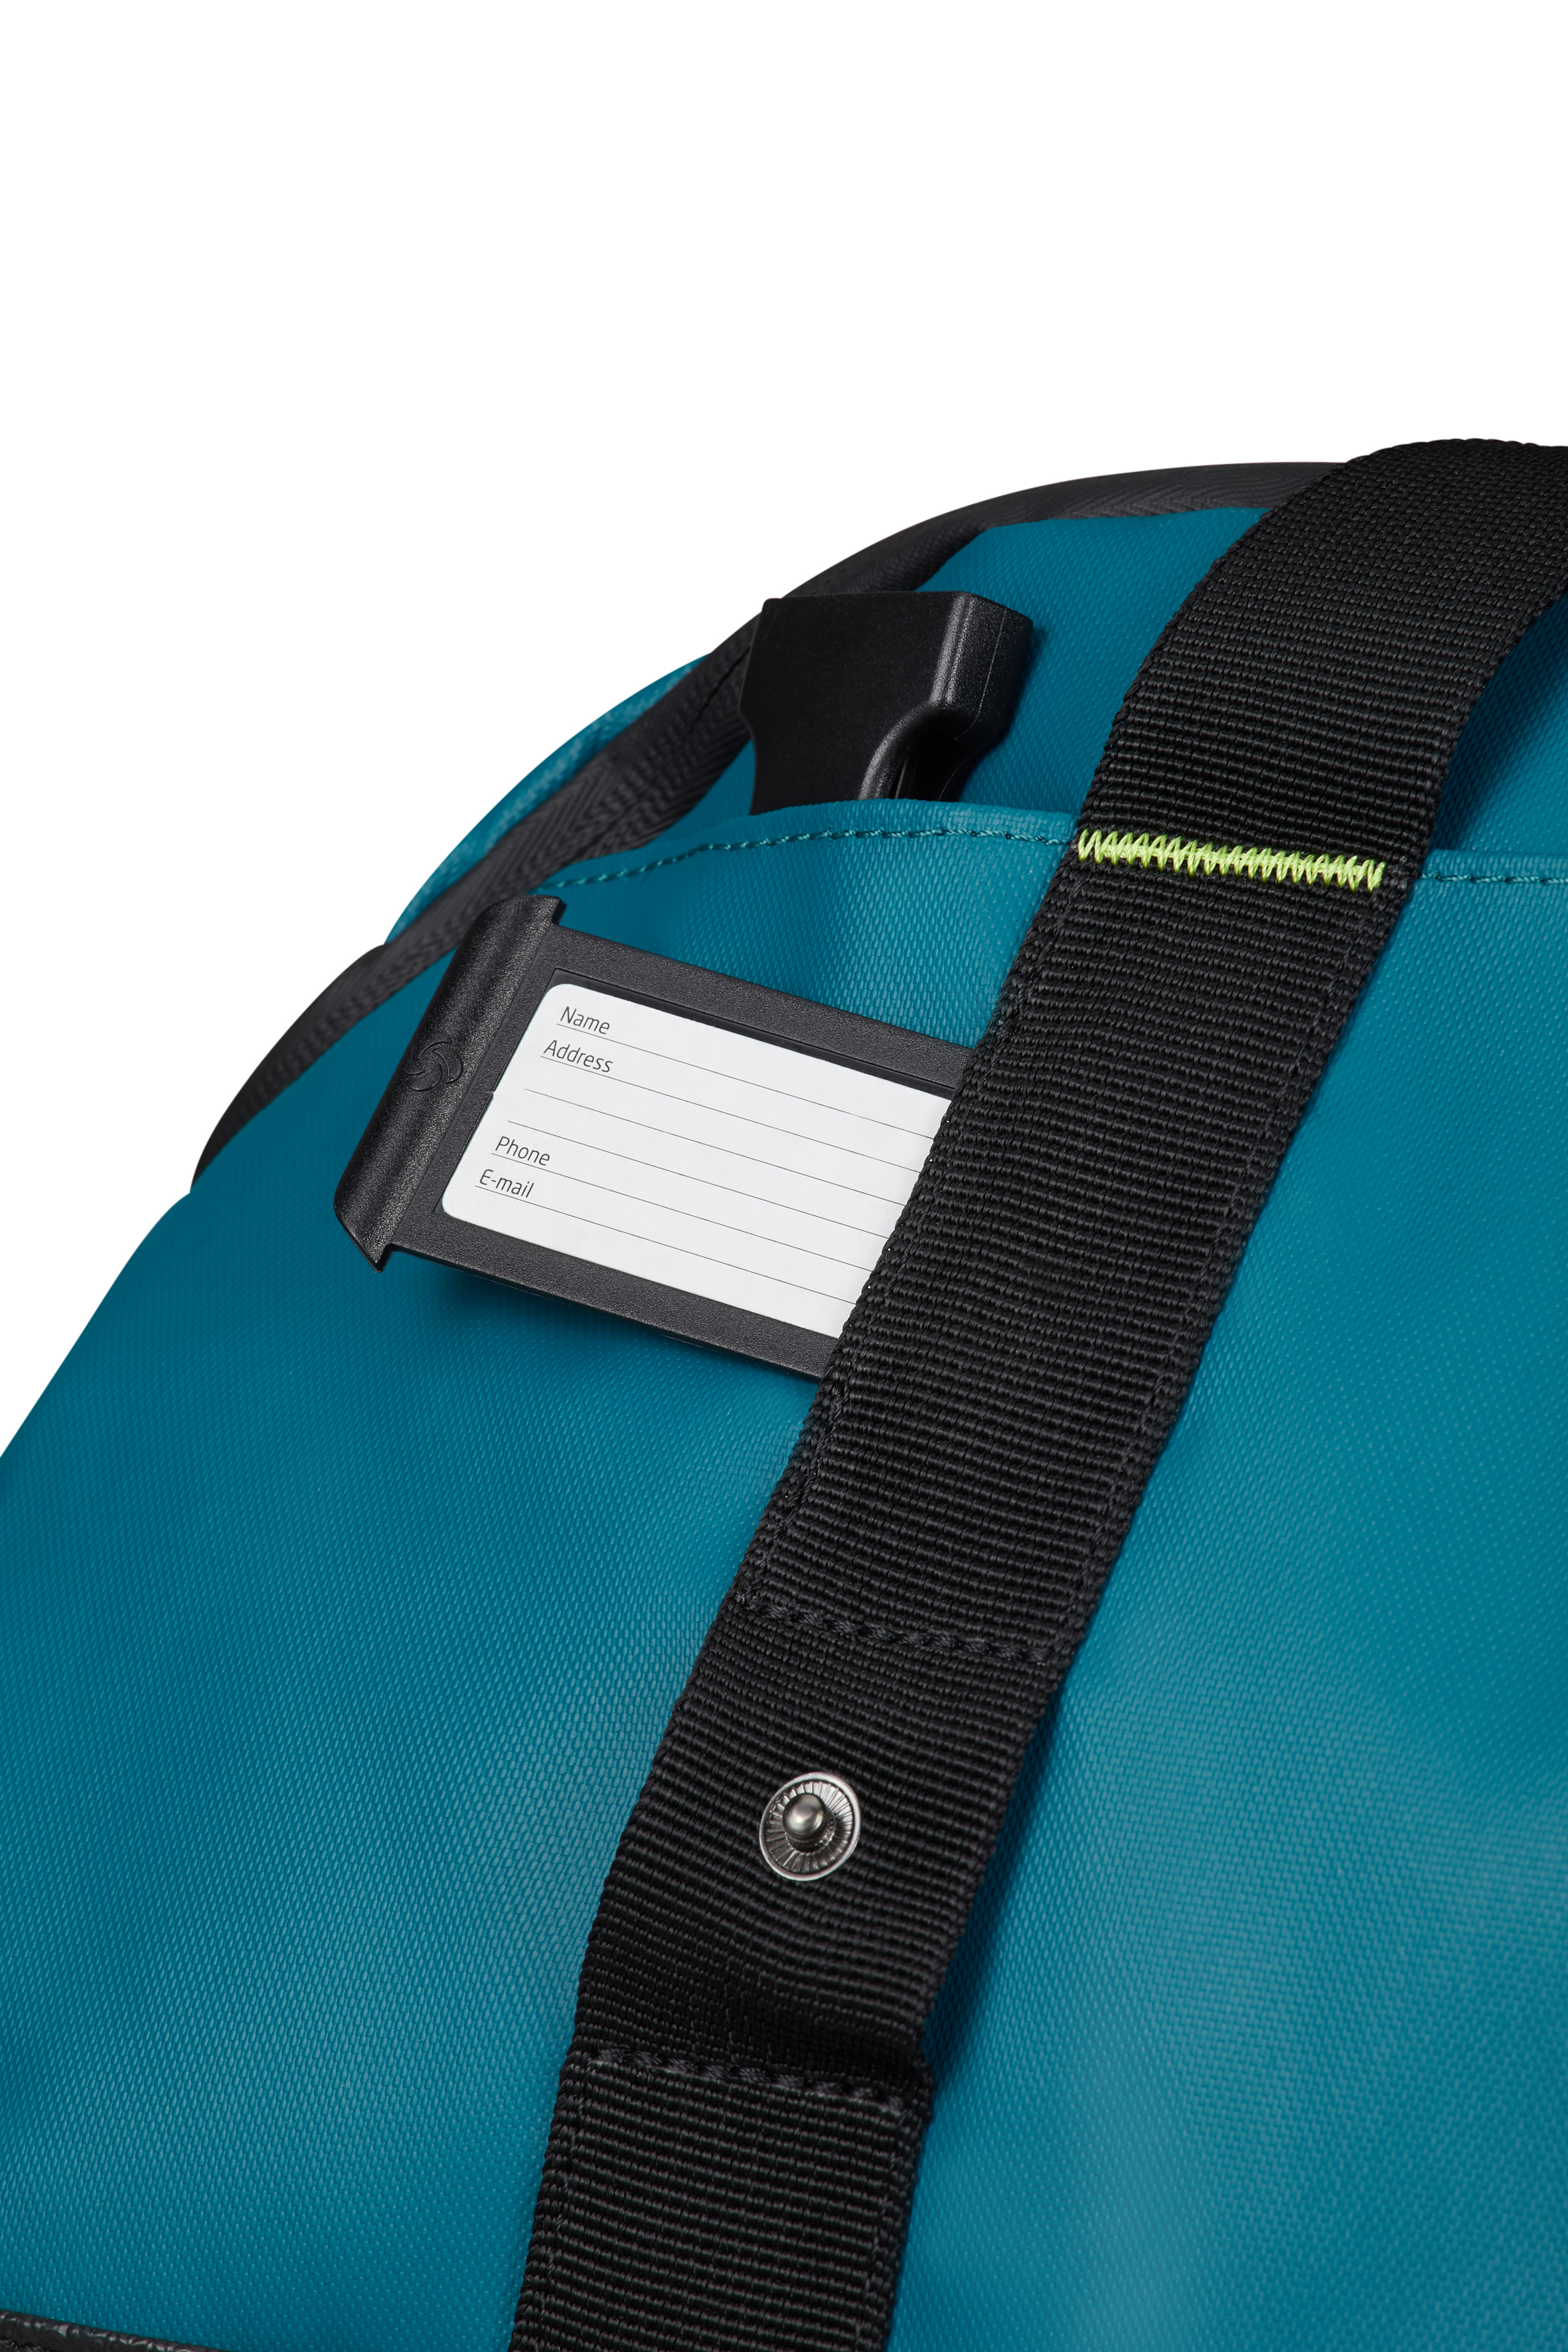 ECODIVER DUFFLE S PETROL BLUE/LIME